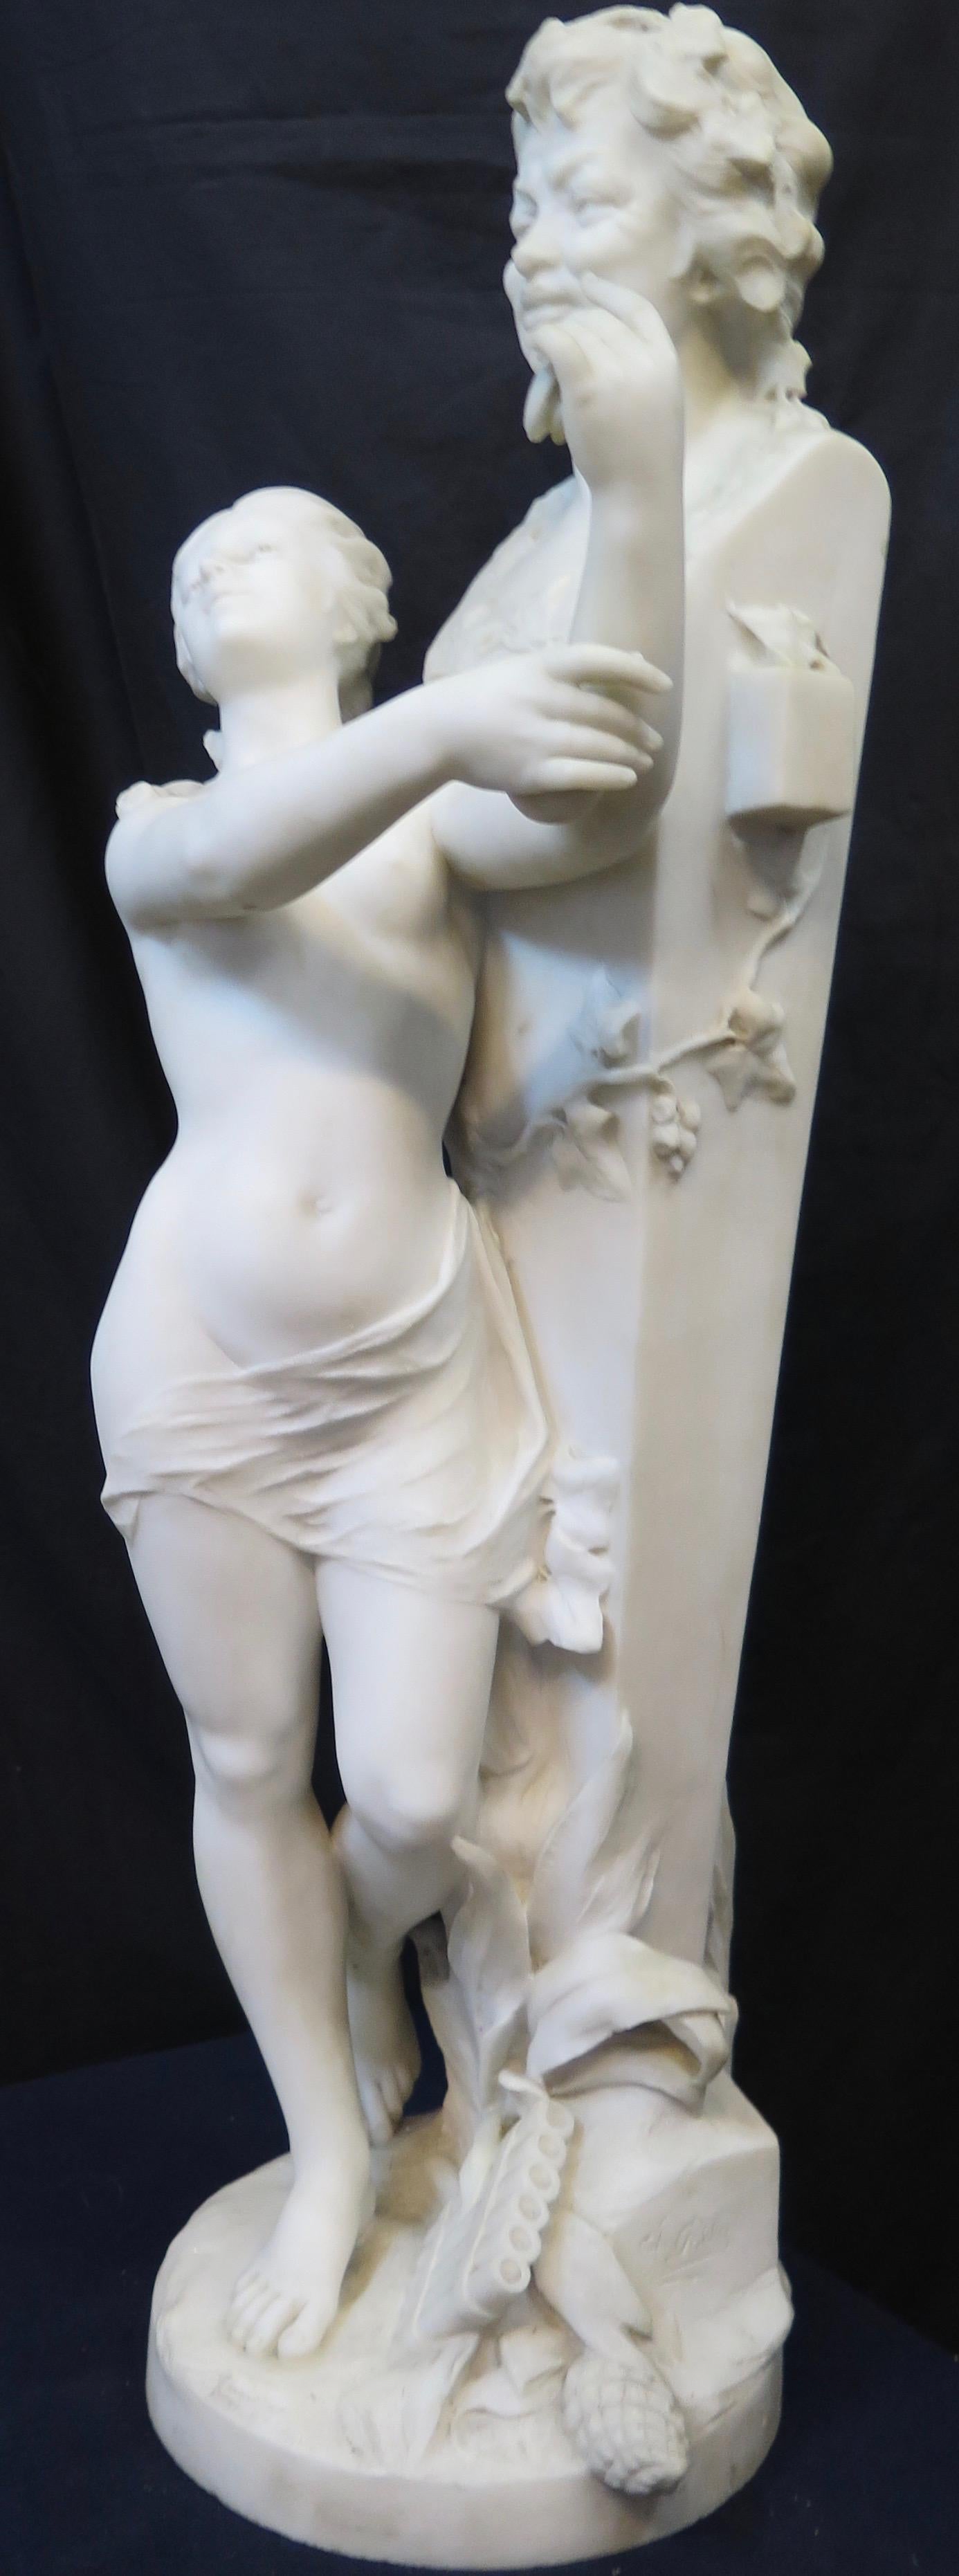 This vintage 19th century Continental statue of Bacchus & an admiring nymph is done in marble & is artist signed. It depicts a nude nymph reveling in her
position immediately in front of the Bacchus monument. The base of the work is signed F. Palla.